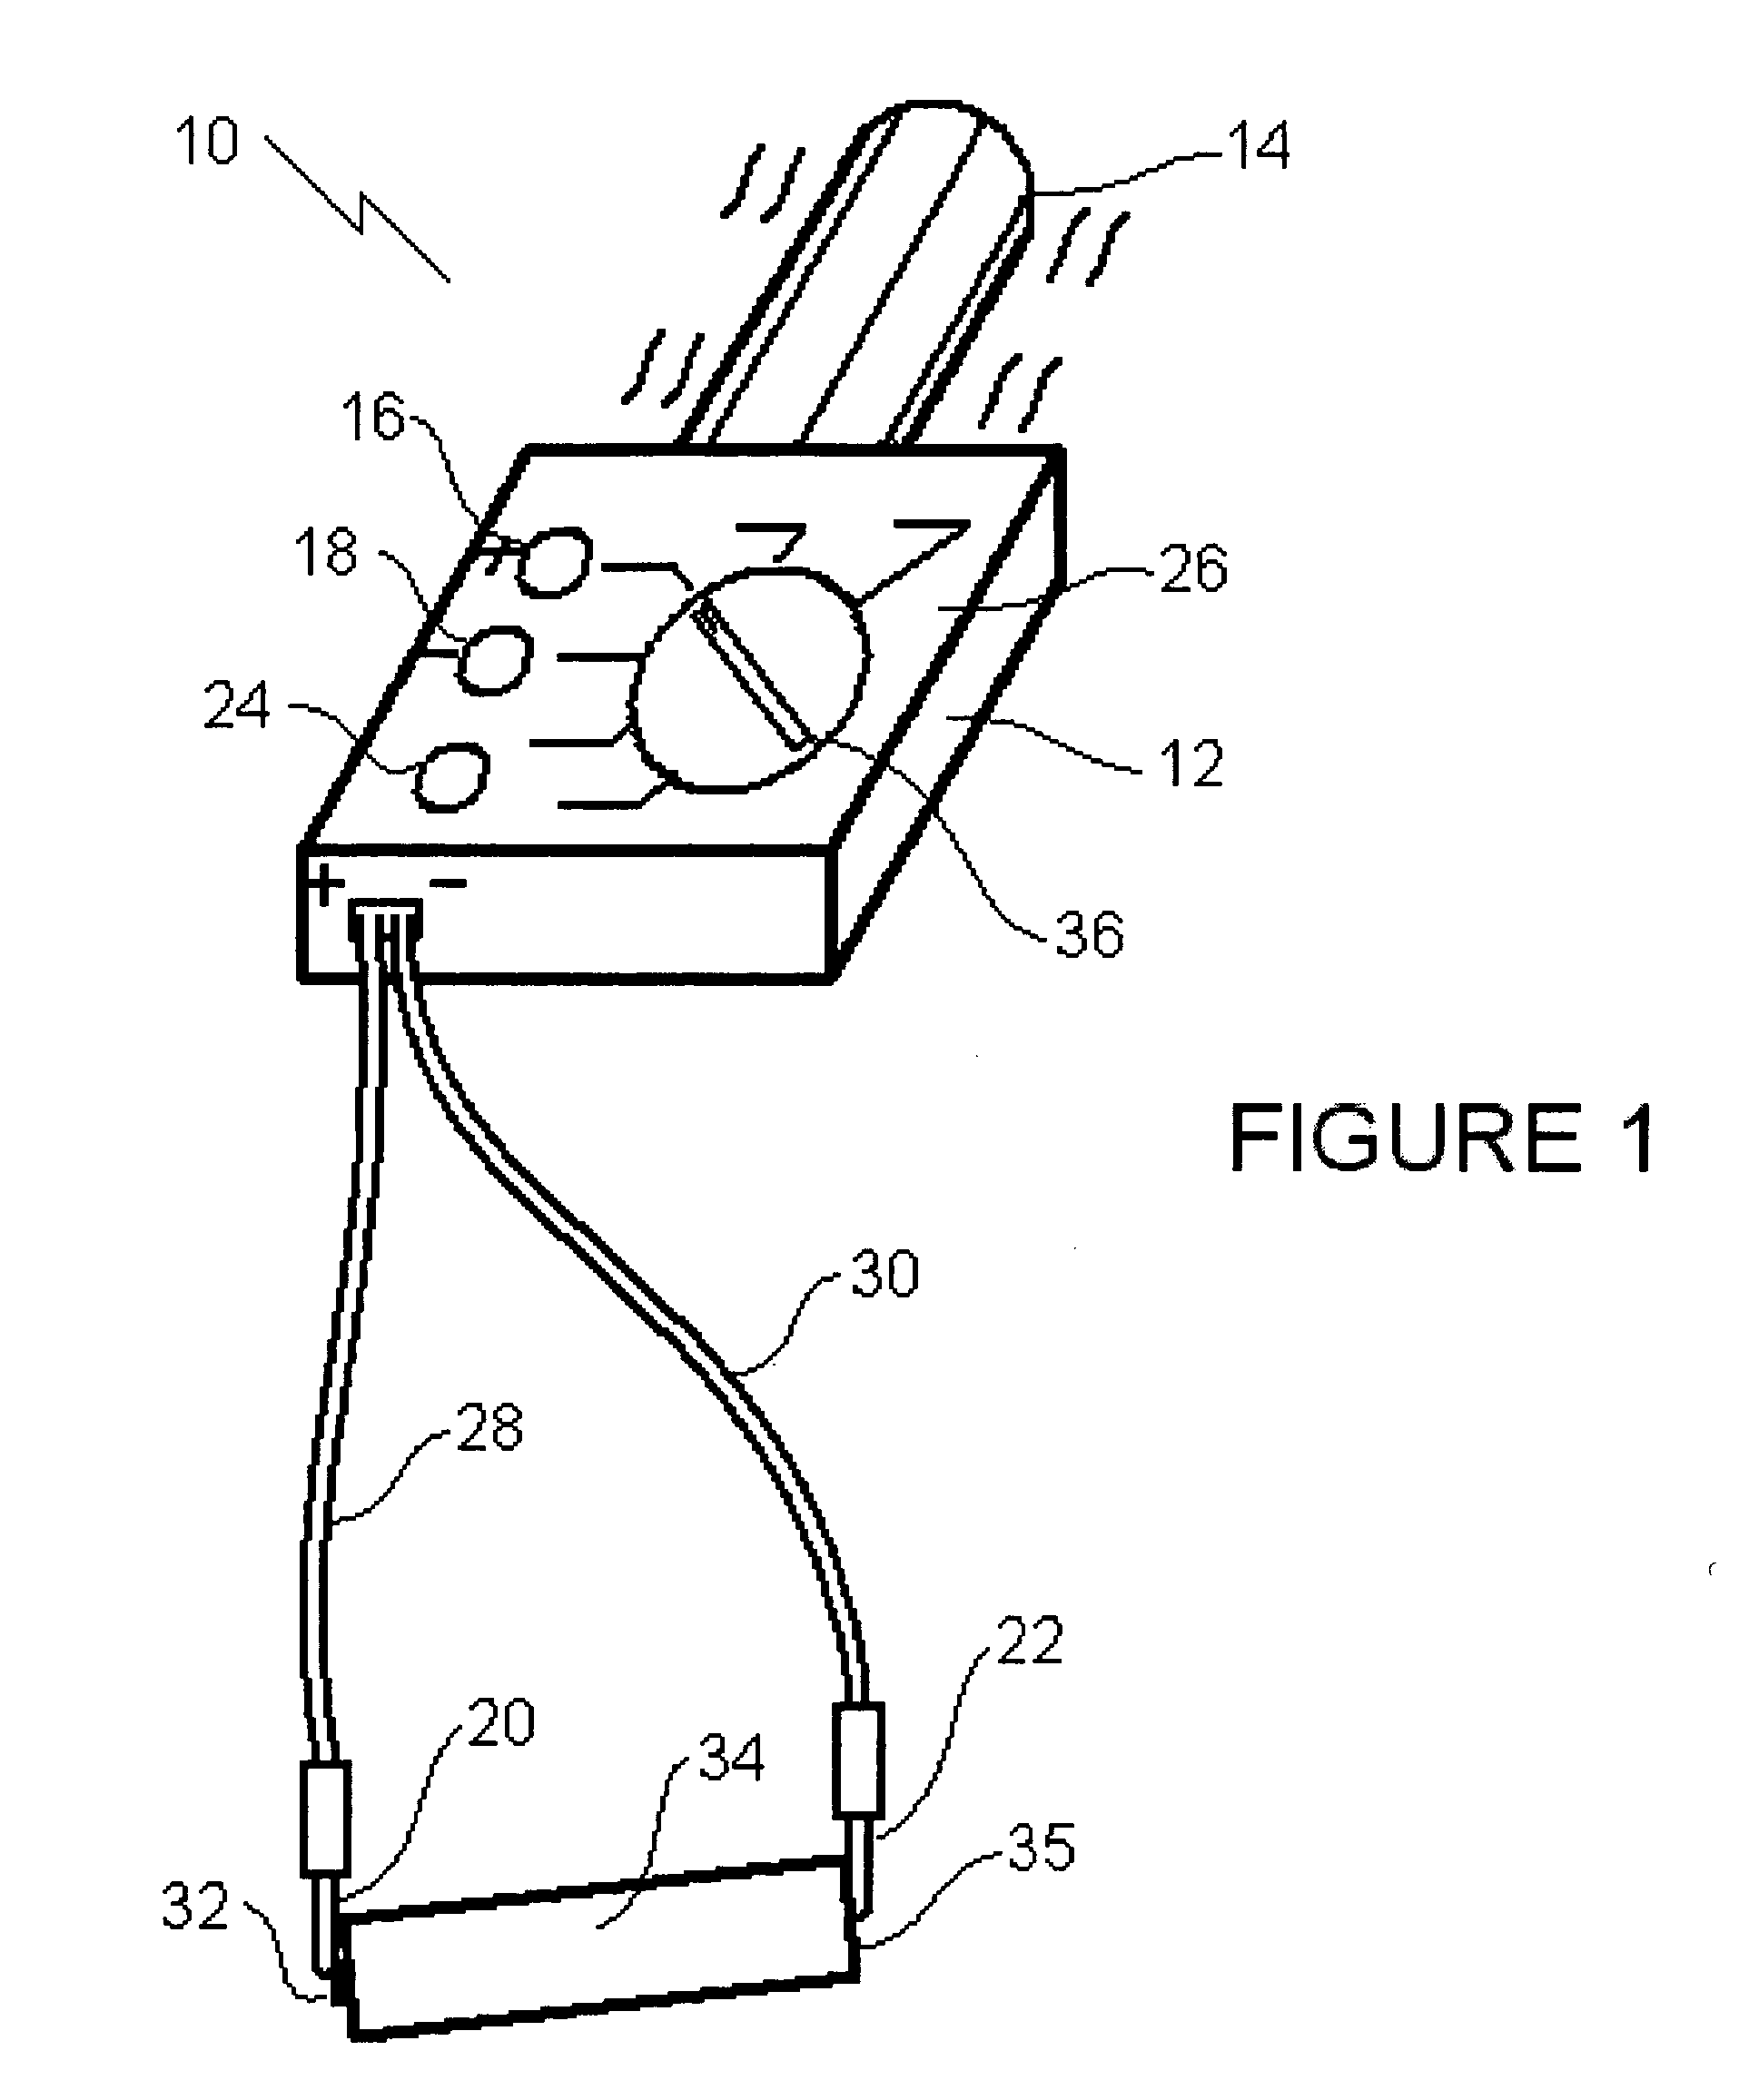 Battery charge testing apparatus